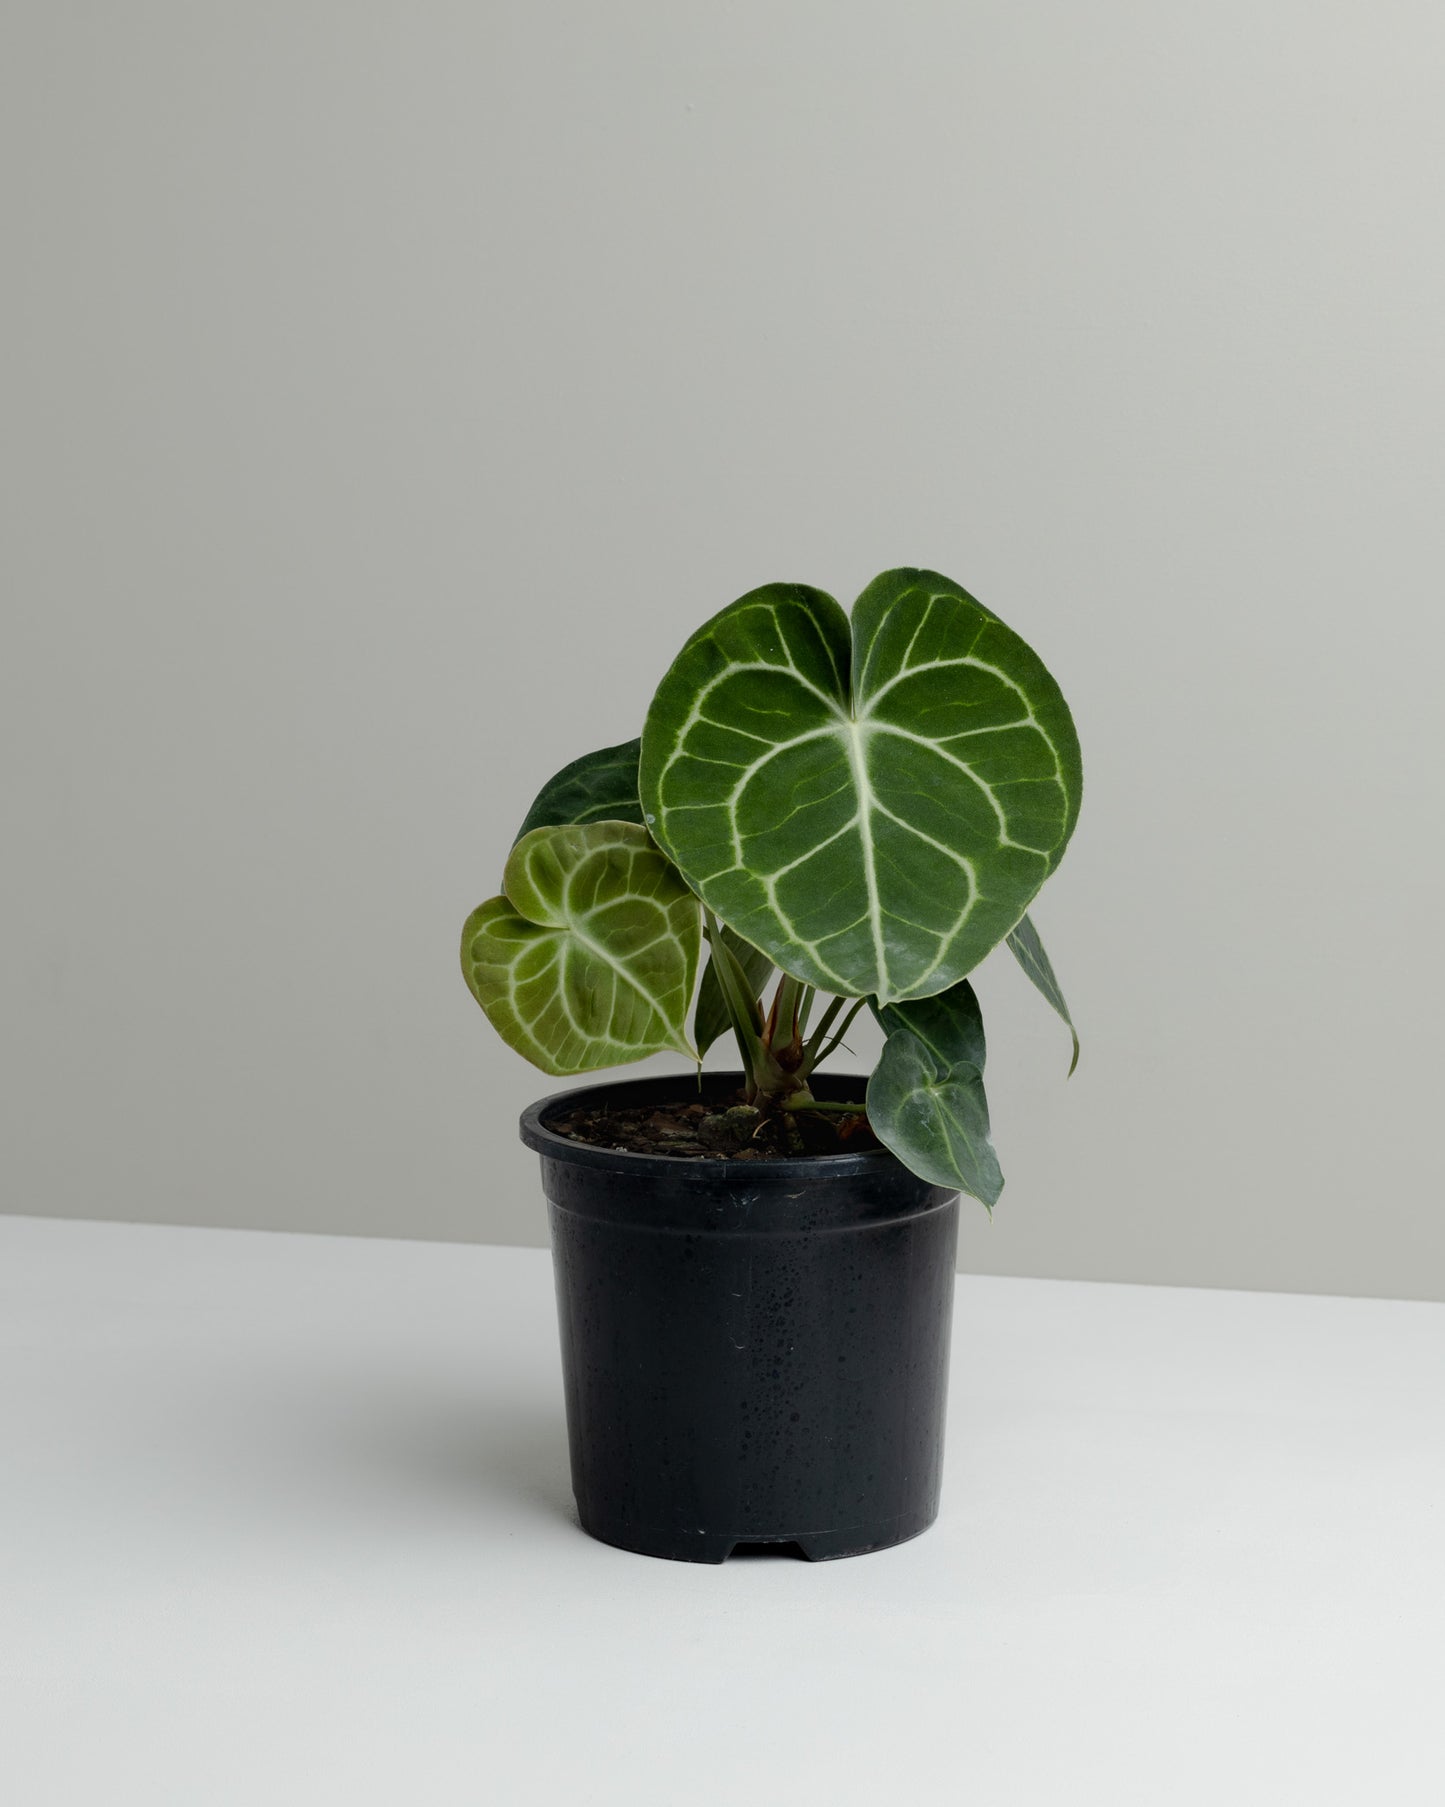 Anthurium Clarinervium, Velvet Cardboard Anthurium. Buy Plants and get it delivered to your door, or click and collect from our Brisbane based store!